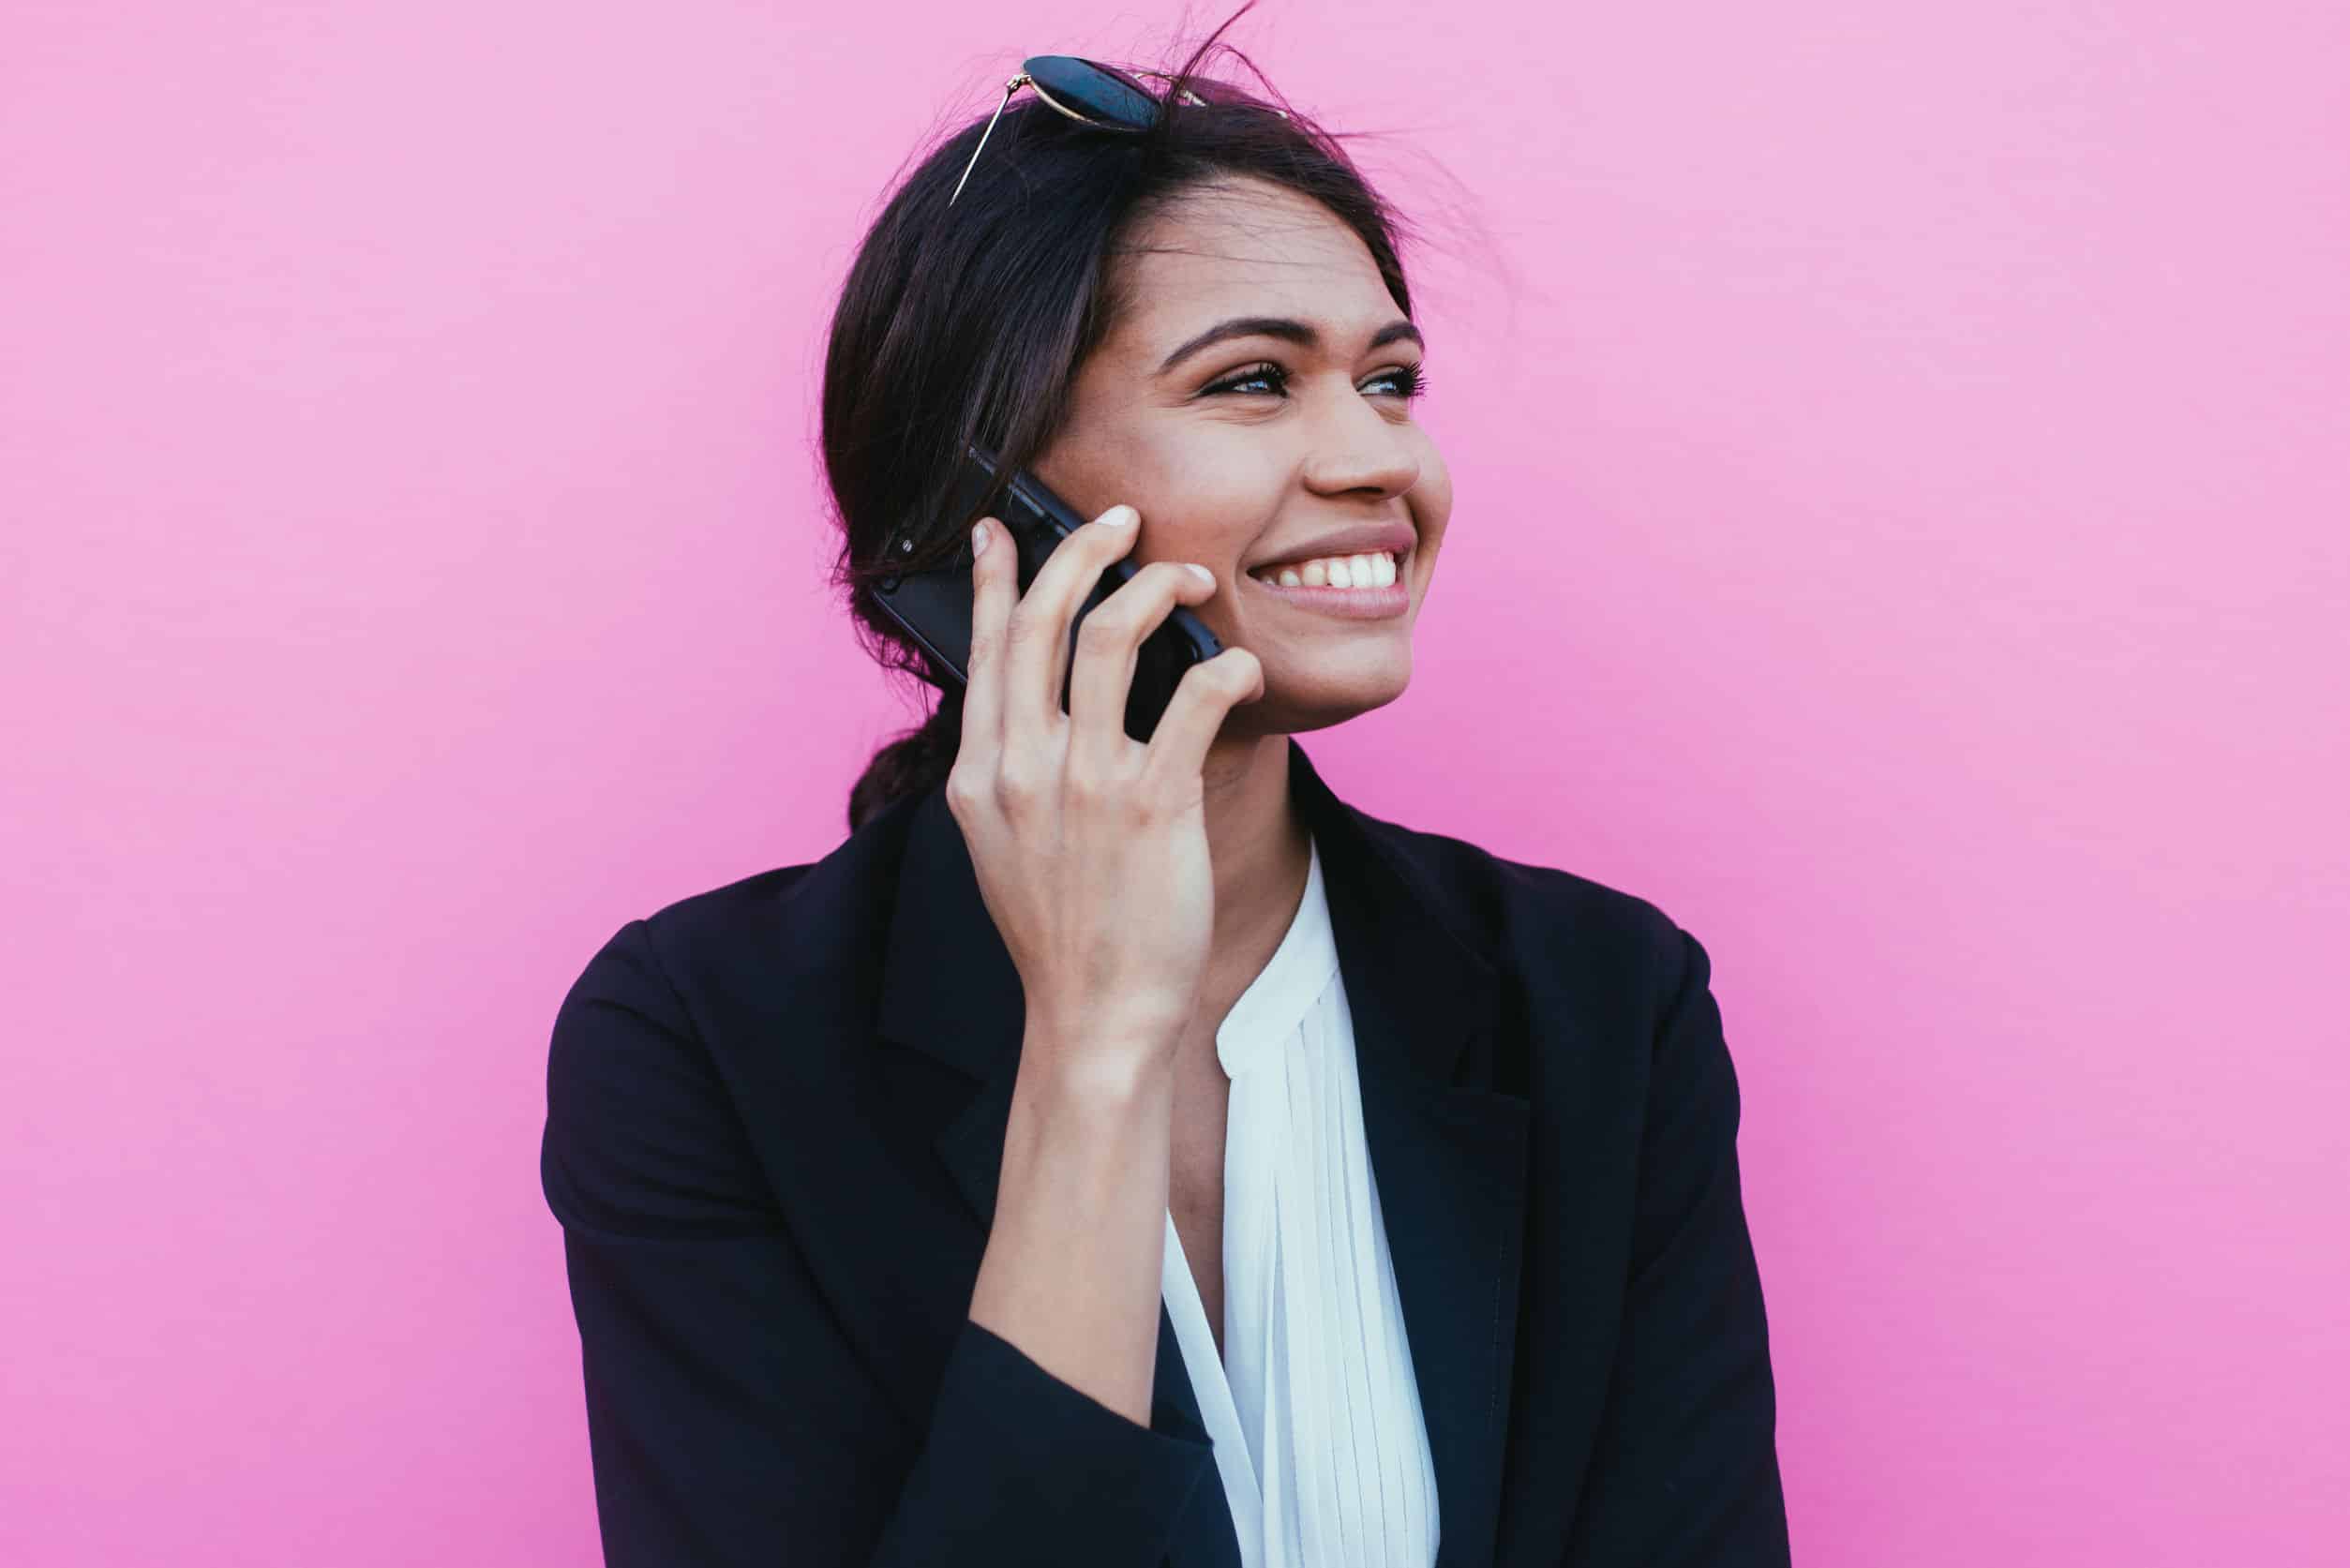 businesswoman smiling while on the phone, standing in front of a pink background